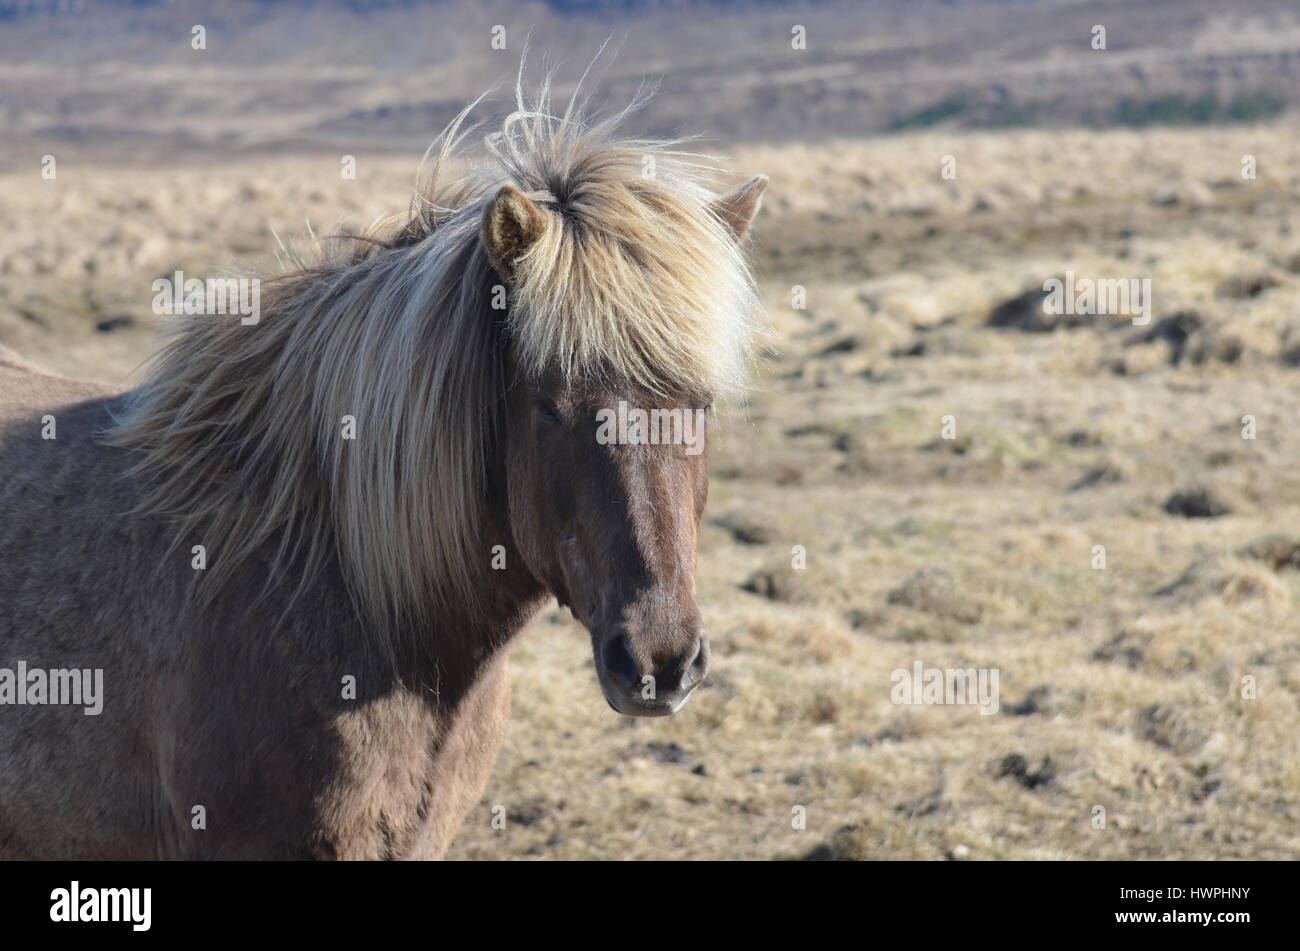 Great roan Icelandic horse standing in a field in Iceland. Stock Photo